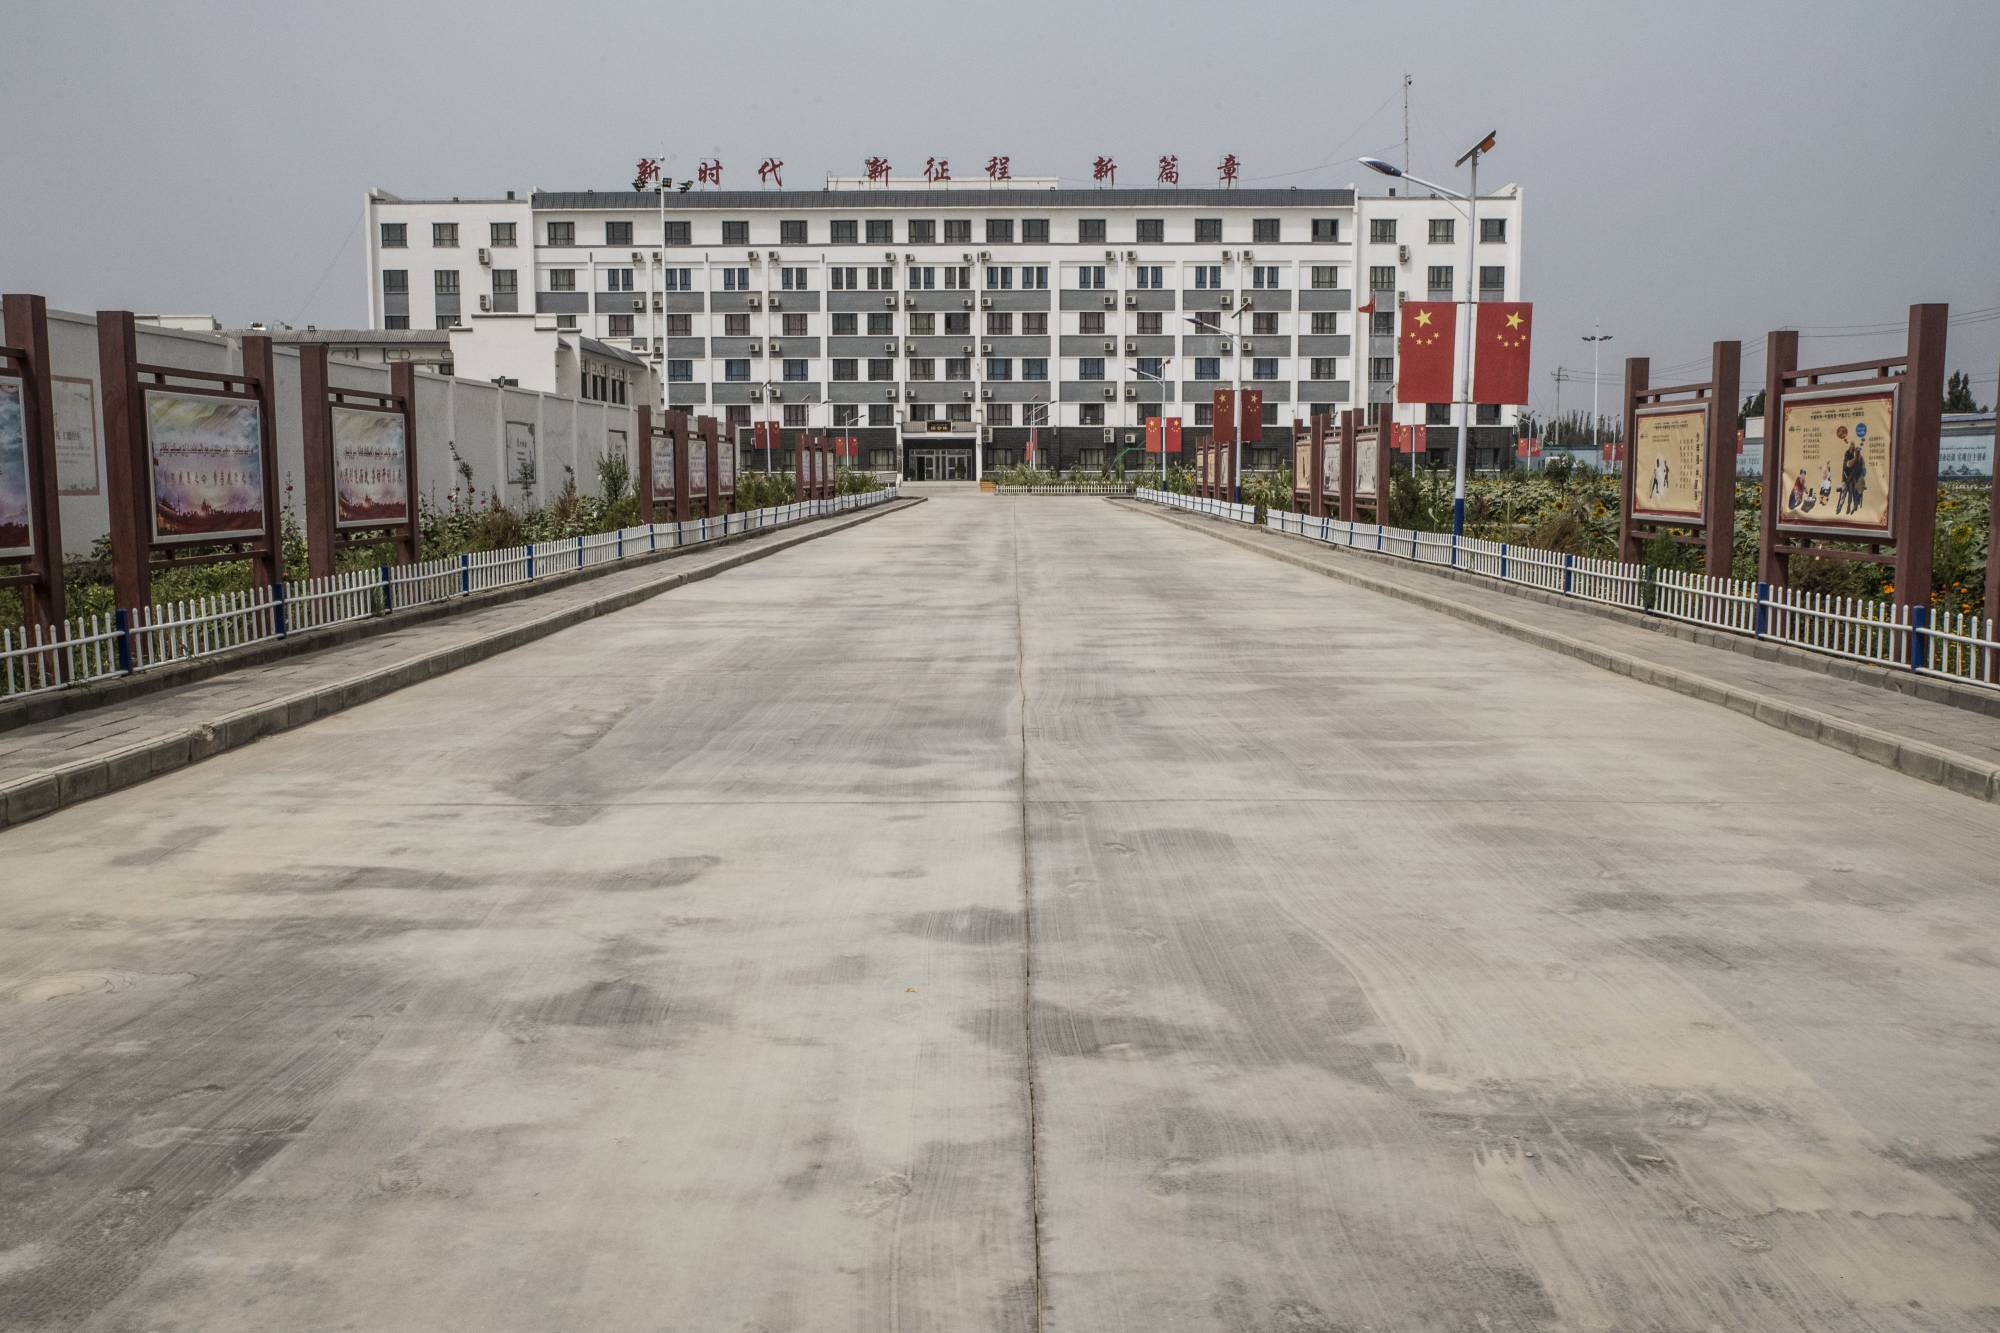 The entrance to an indoctrination center in Hotan, China on Aug. 4, 2019. In 2017, the regional government announced plans to transfer 100,000 people from the cities of Kashgar and Hotan in southern Xinjiang into new jobs.  | GILLES SABRIE / THE NEW YORK TIMES